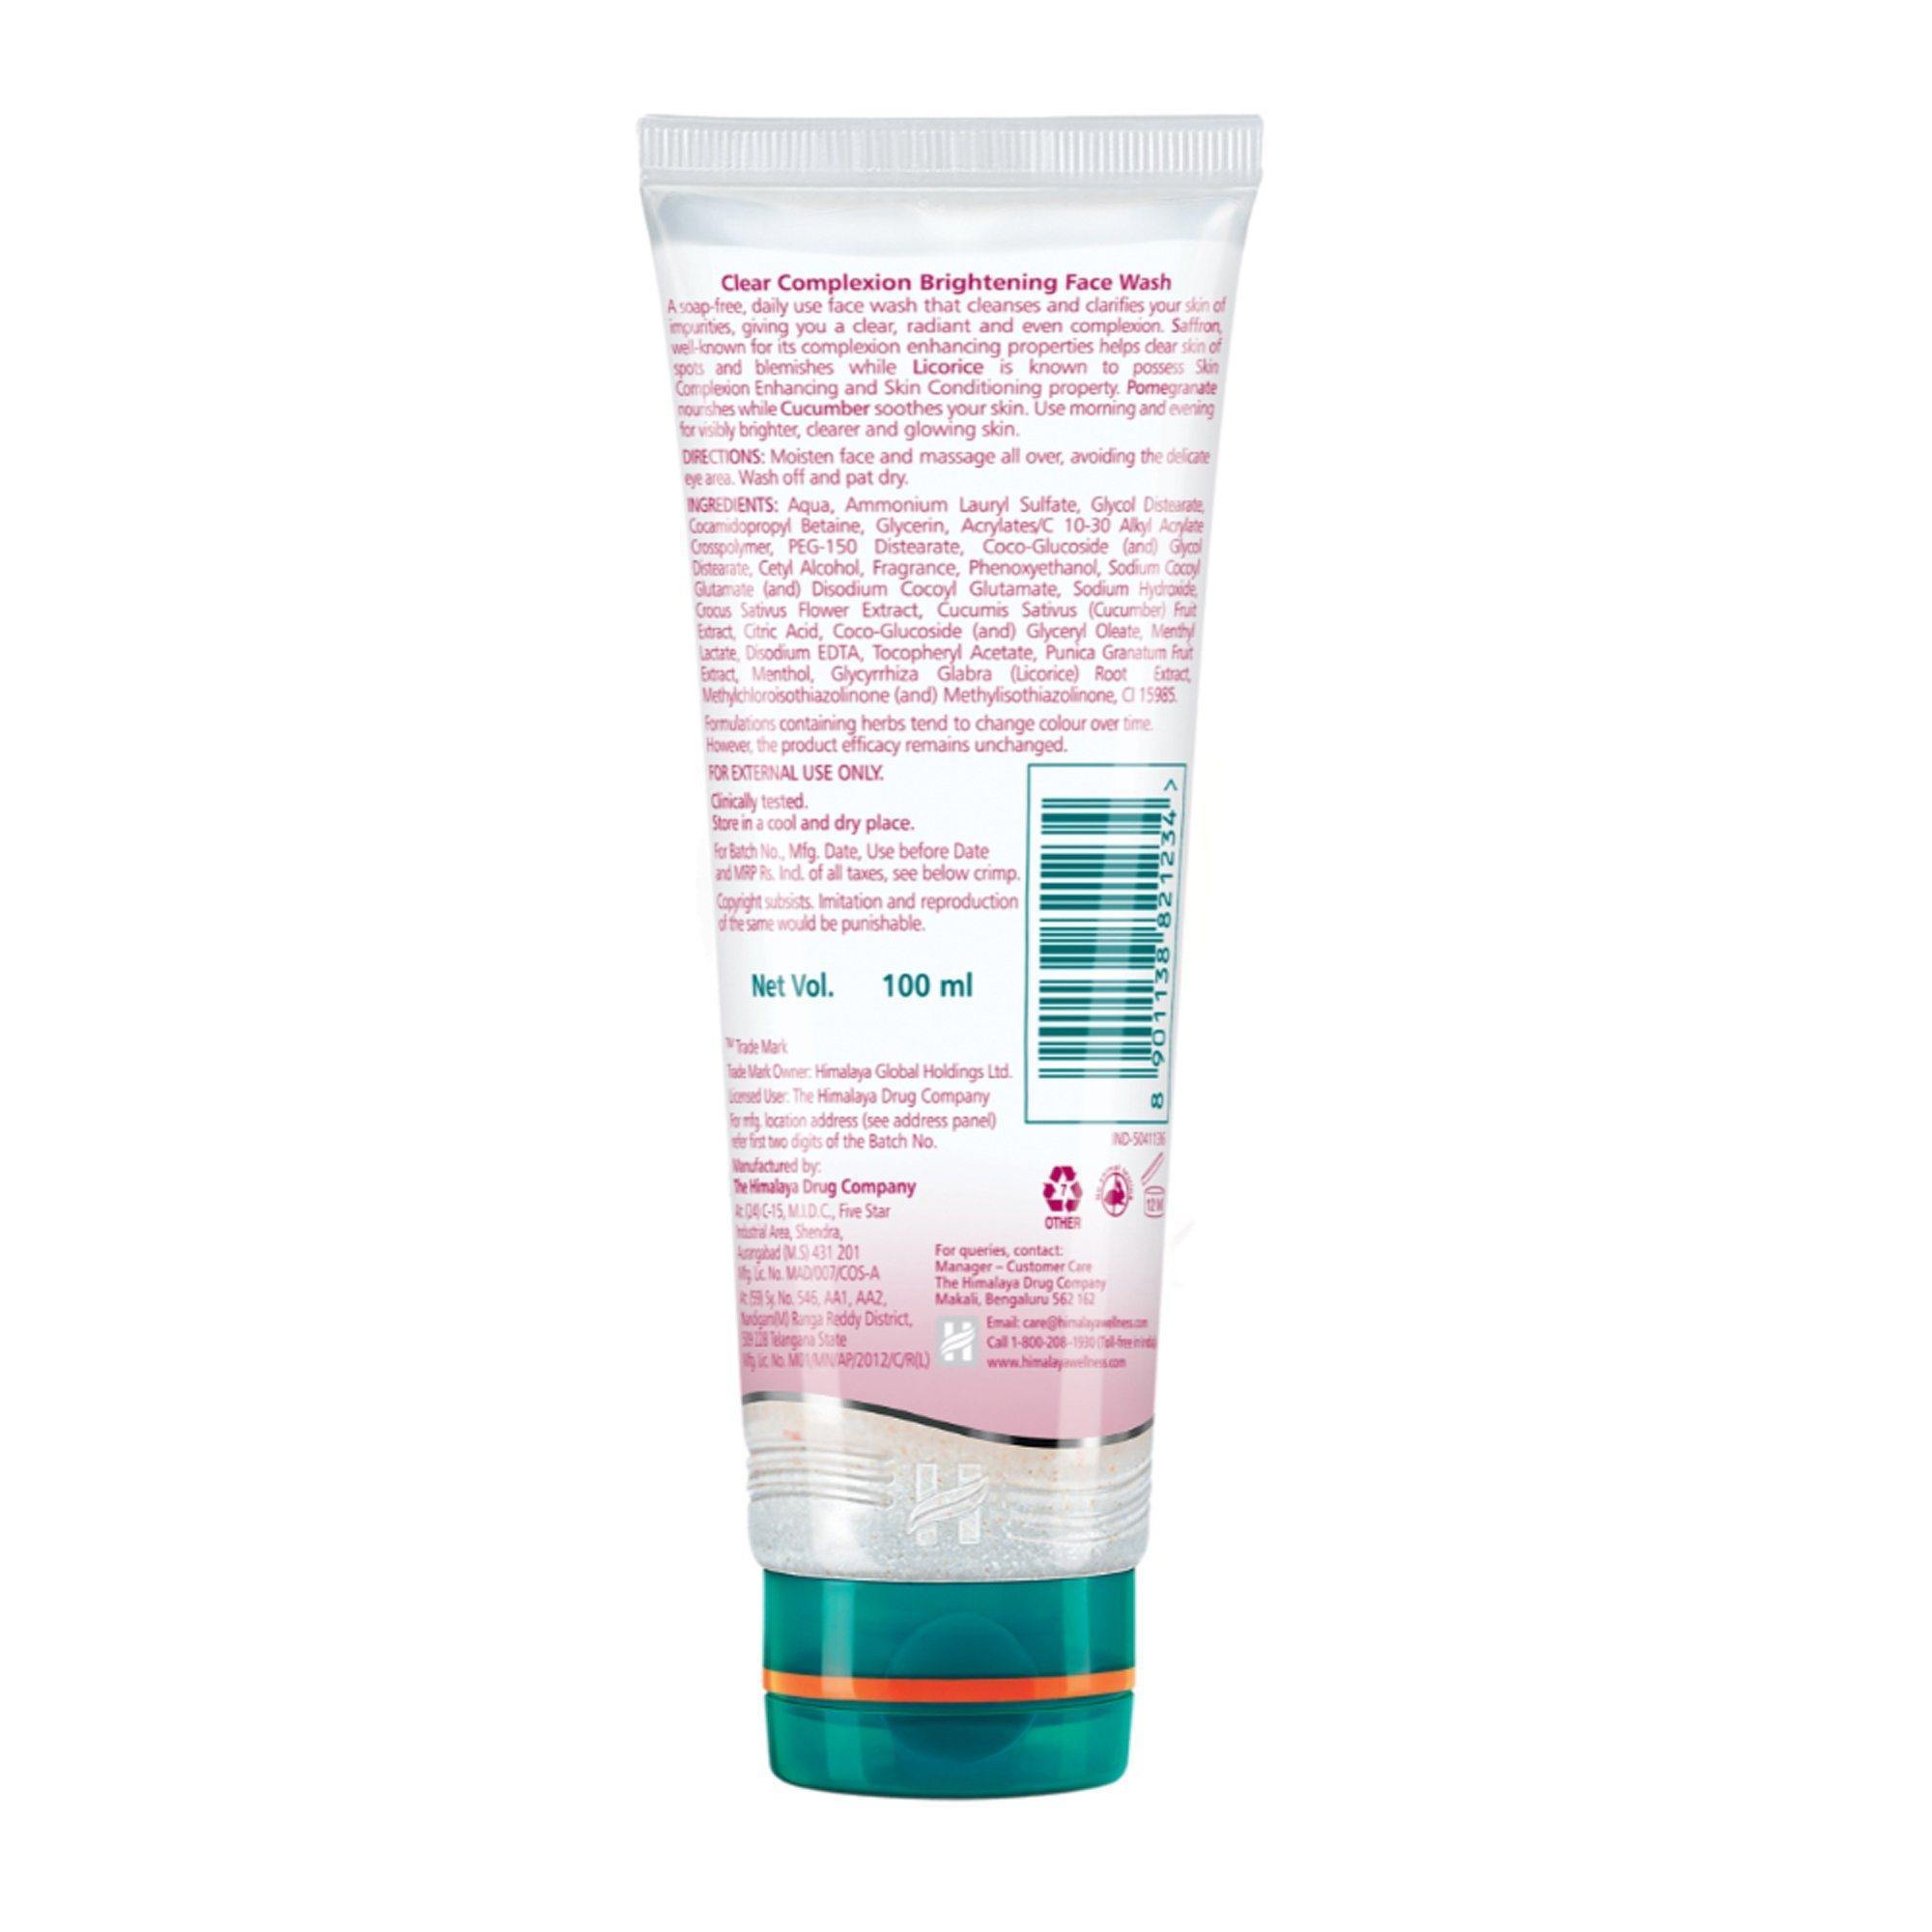 Himalaya Clear Complexion Brightening Face Wash 100ml Ingredients